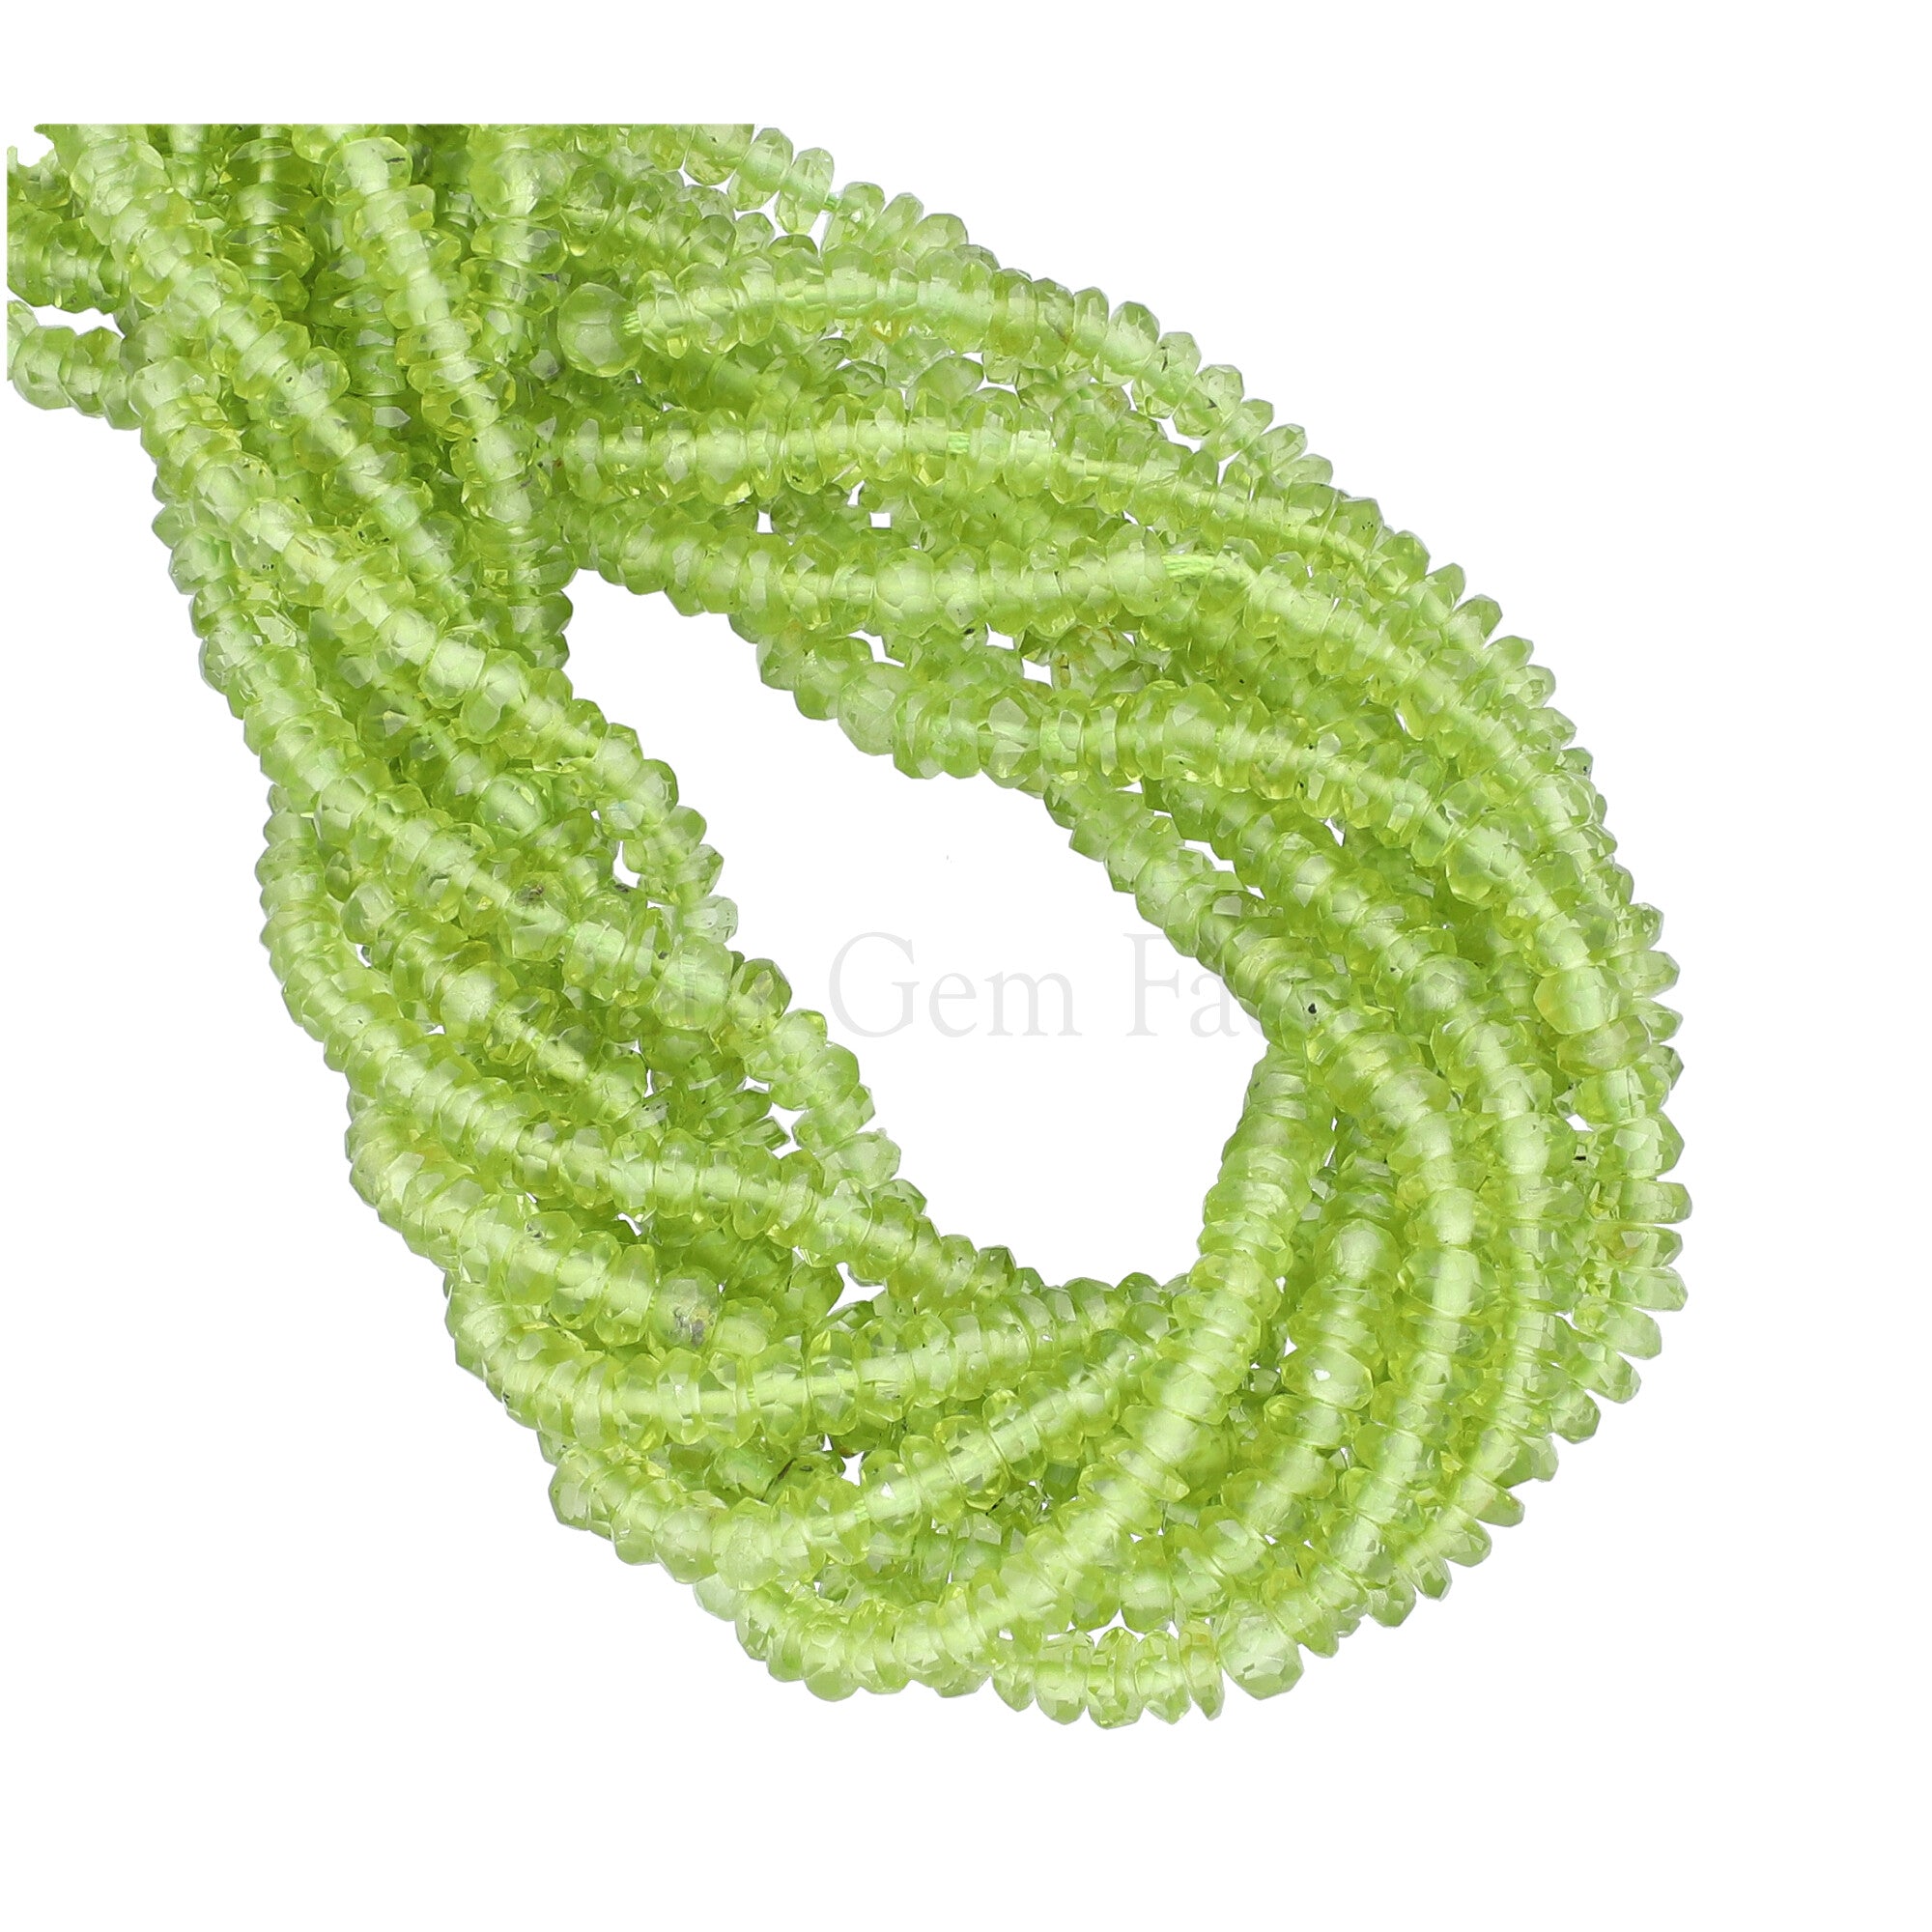 Peridot 4 to 4.5 MM Faceted Rondelle Shape Beads Strand 1mm Drill